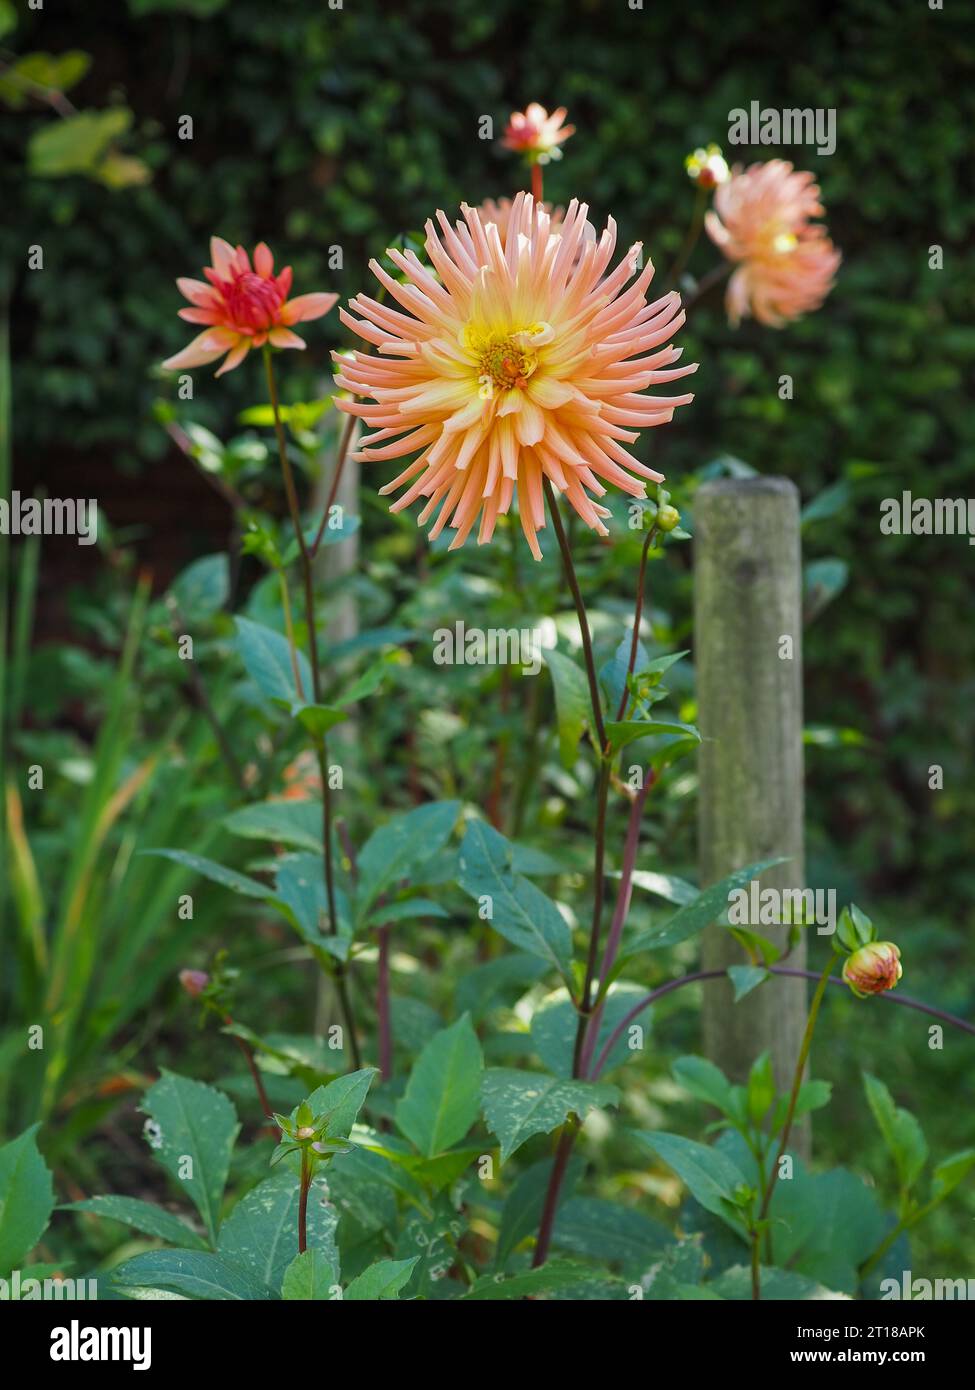 Portrait of an unusual orange / coral / apricot / peach cactus Dahlia flower with spiky petals and long stem in a cutting garden in October in Britain Stock Photo